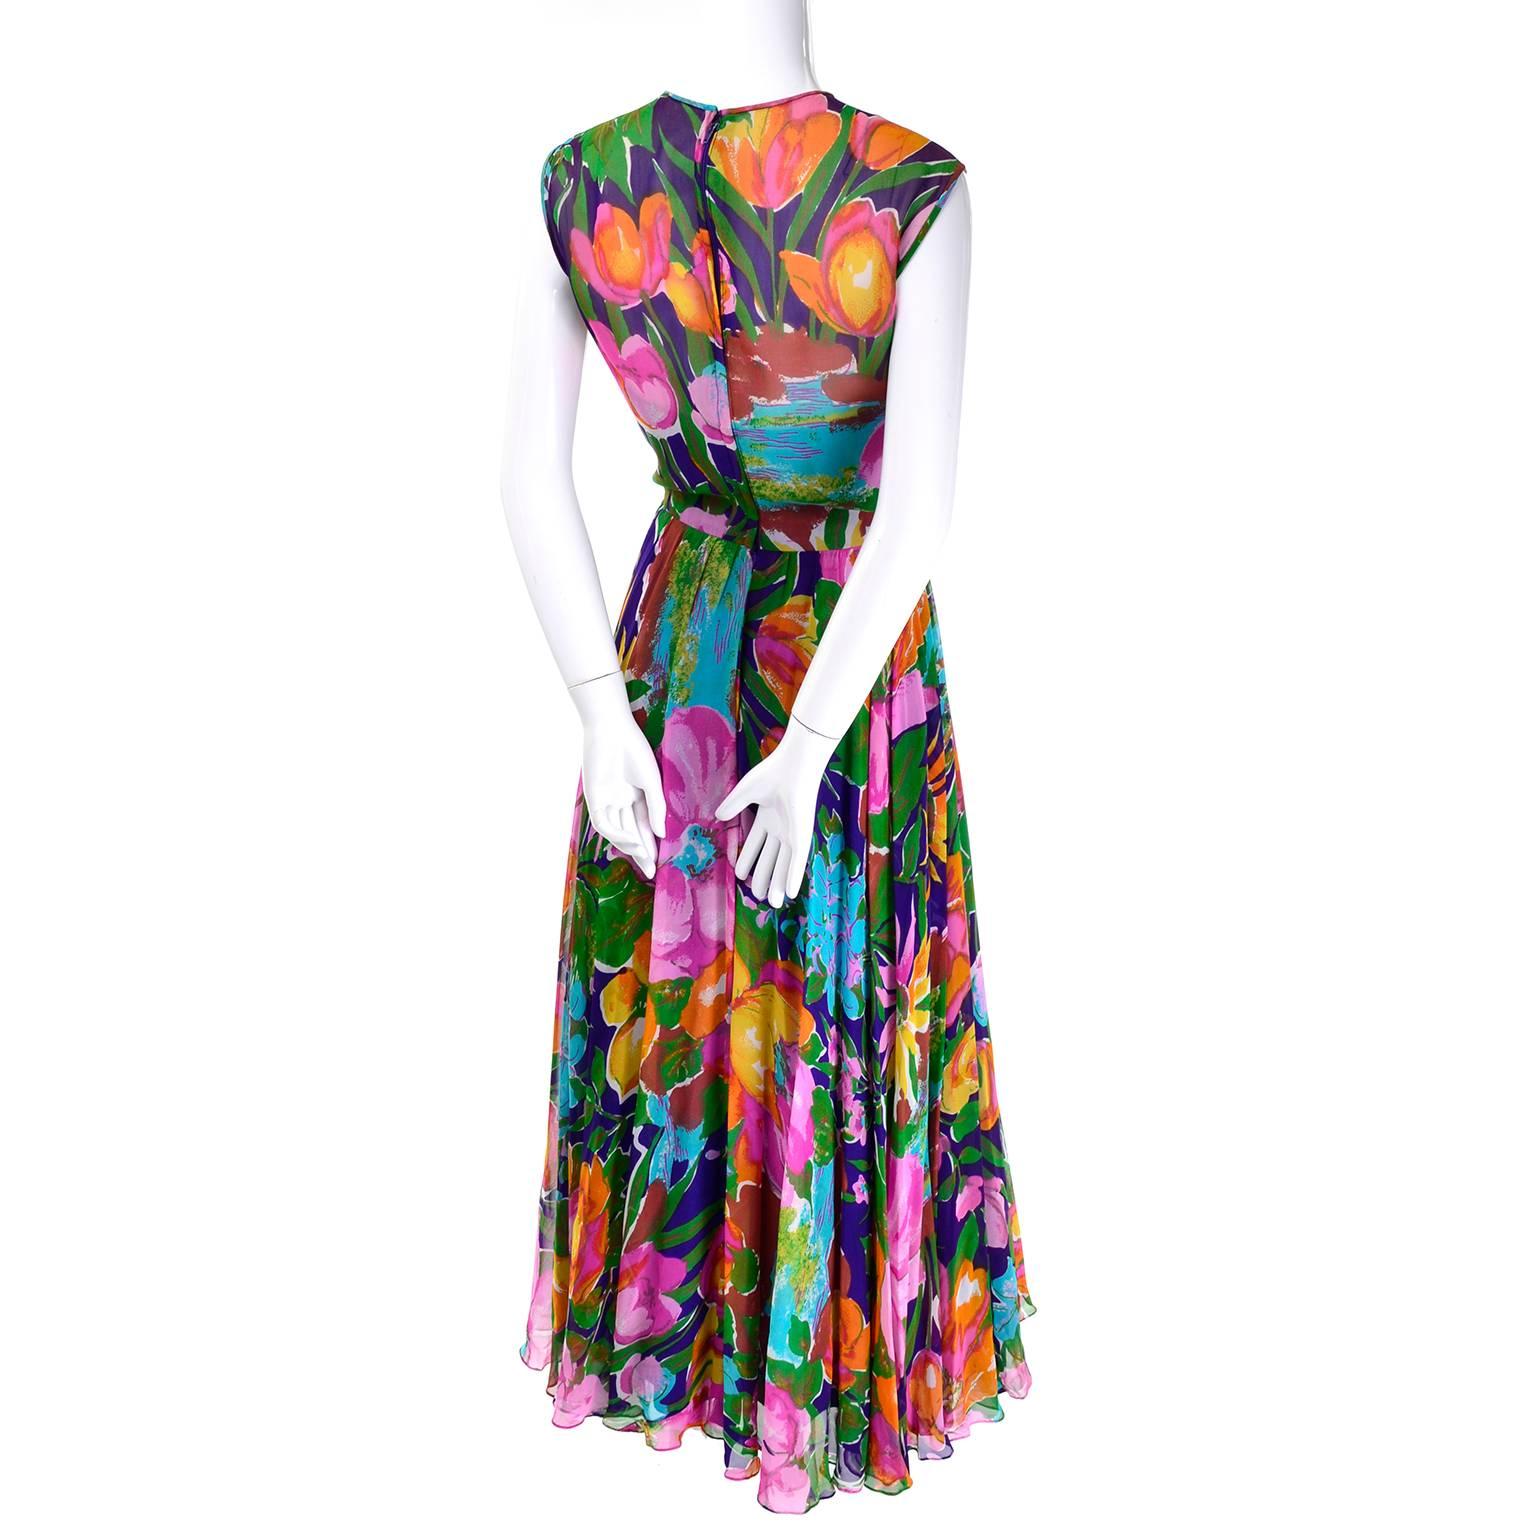 1970s Vintage Sleeveless Dress in a Bright Floral Chiffon Print 1